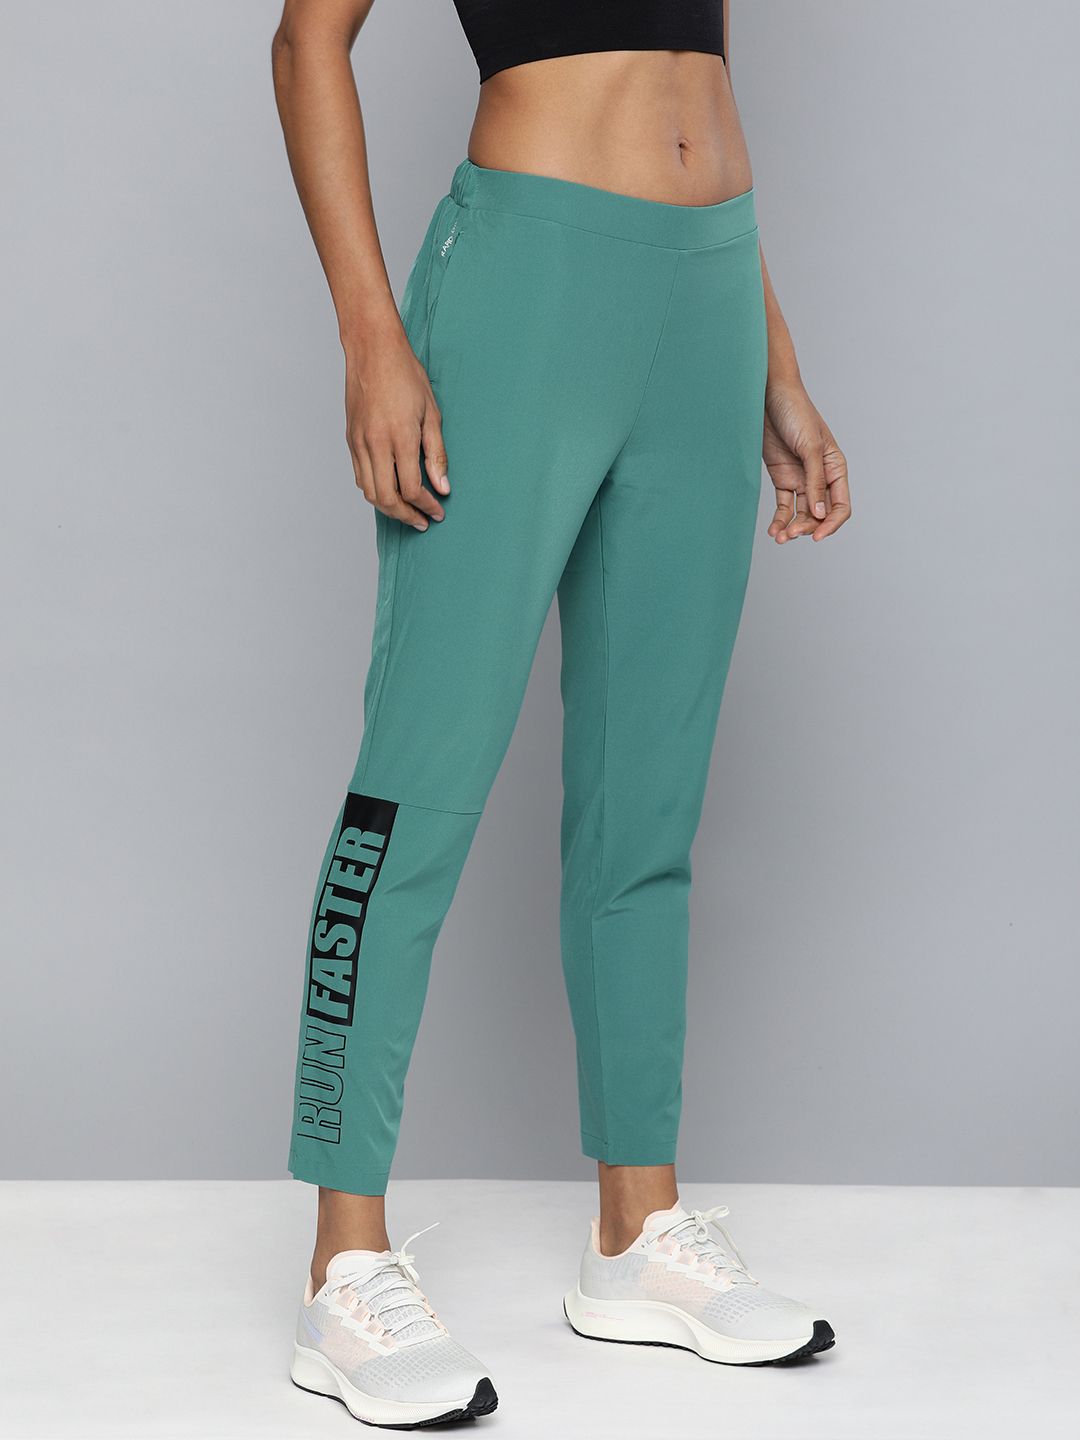 HRX by Hrithik Roshan Women Sea Green Printed Rapid Dry Antimicrobial Running Track Pants Price in India